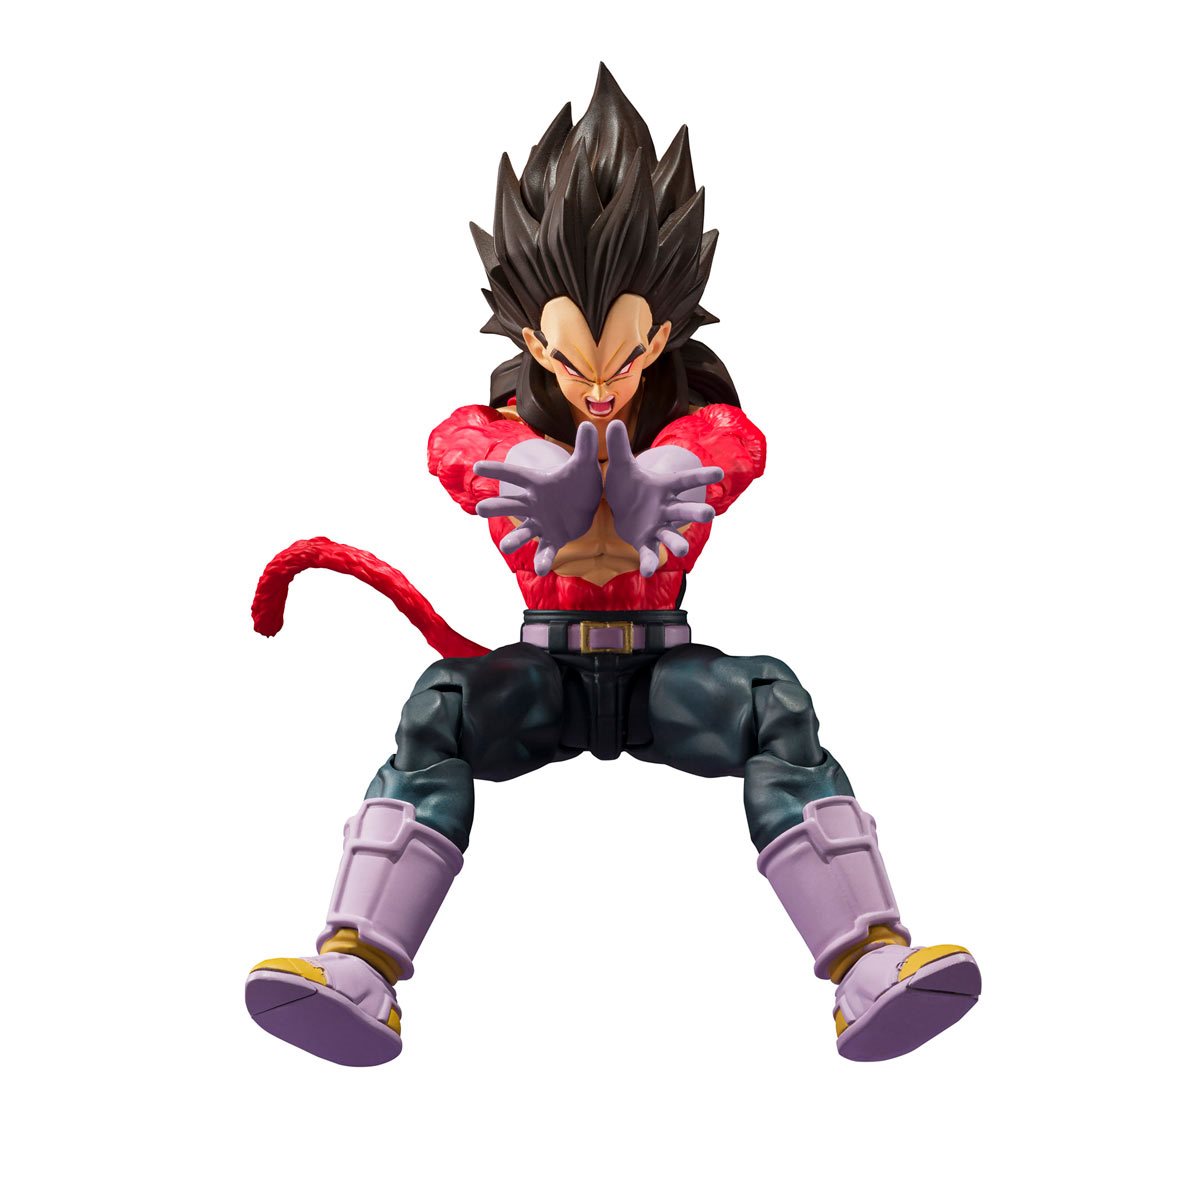 A highly articulated Super Saiyan 4 Vegeta figure from Dragon Ball GT, standing under 6 inches tall. Comes with three face plates, five pairs of interchangeable hands, a tail, and an energy blast effect.